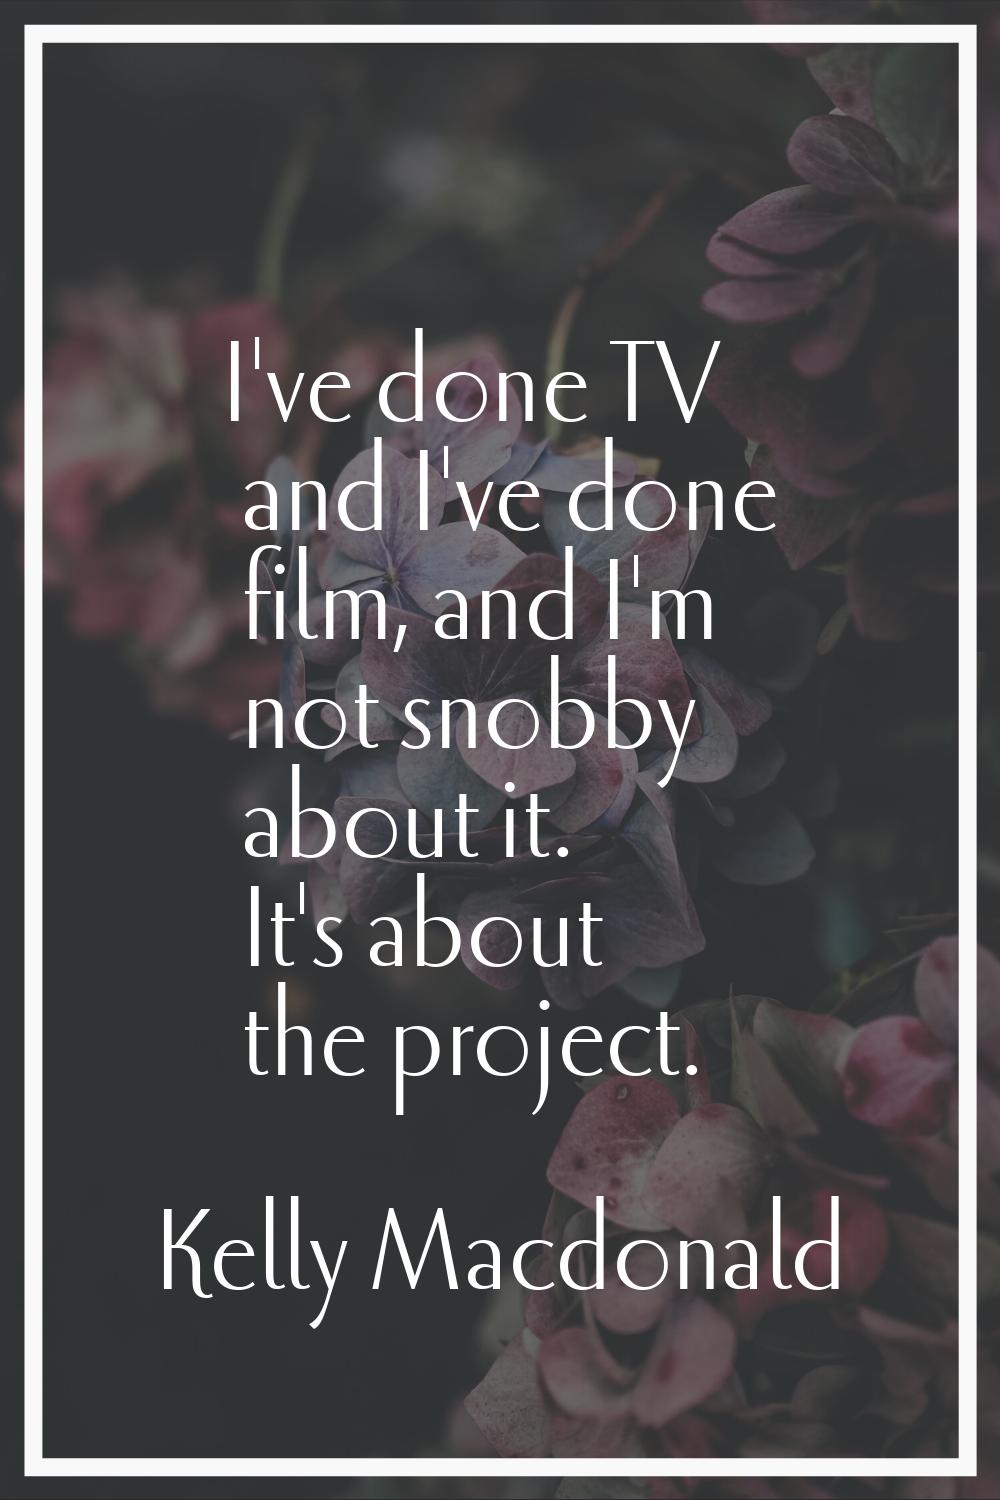 I've done TV and I've done film, and I'm not snobby about it. It's about the project.